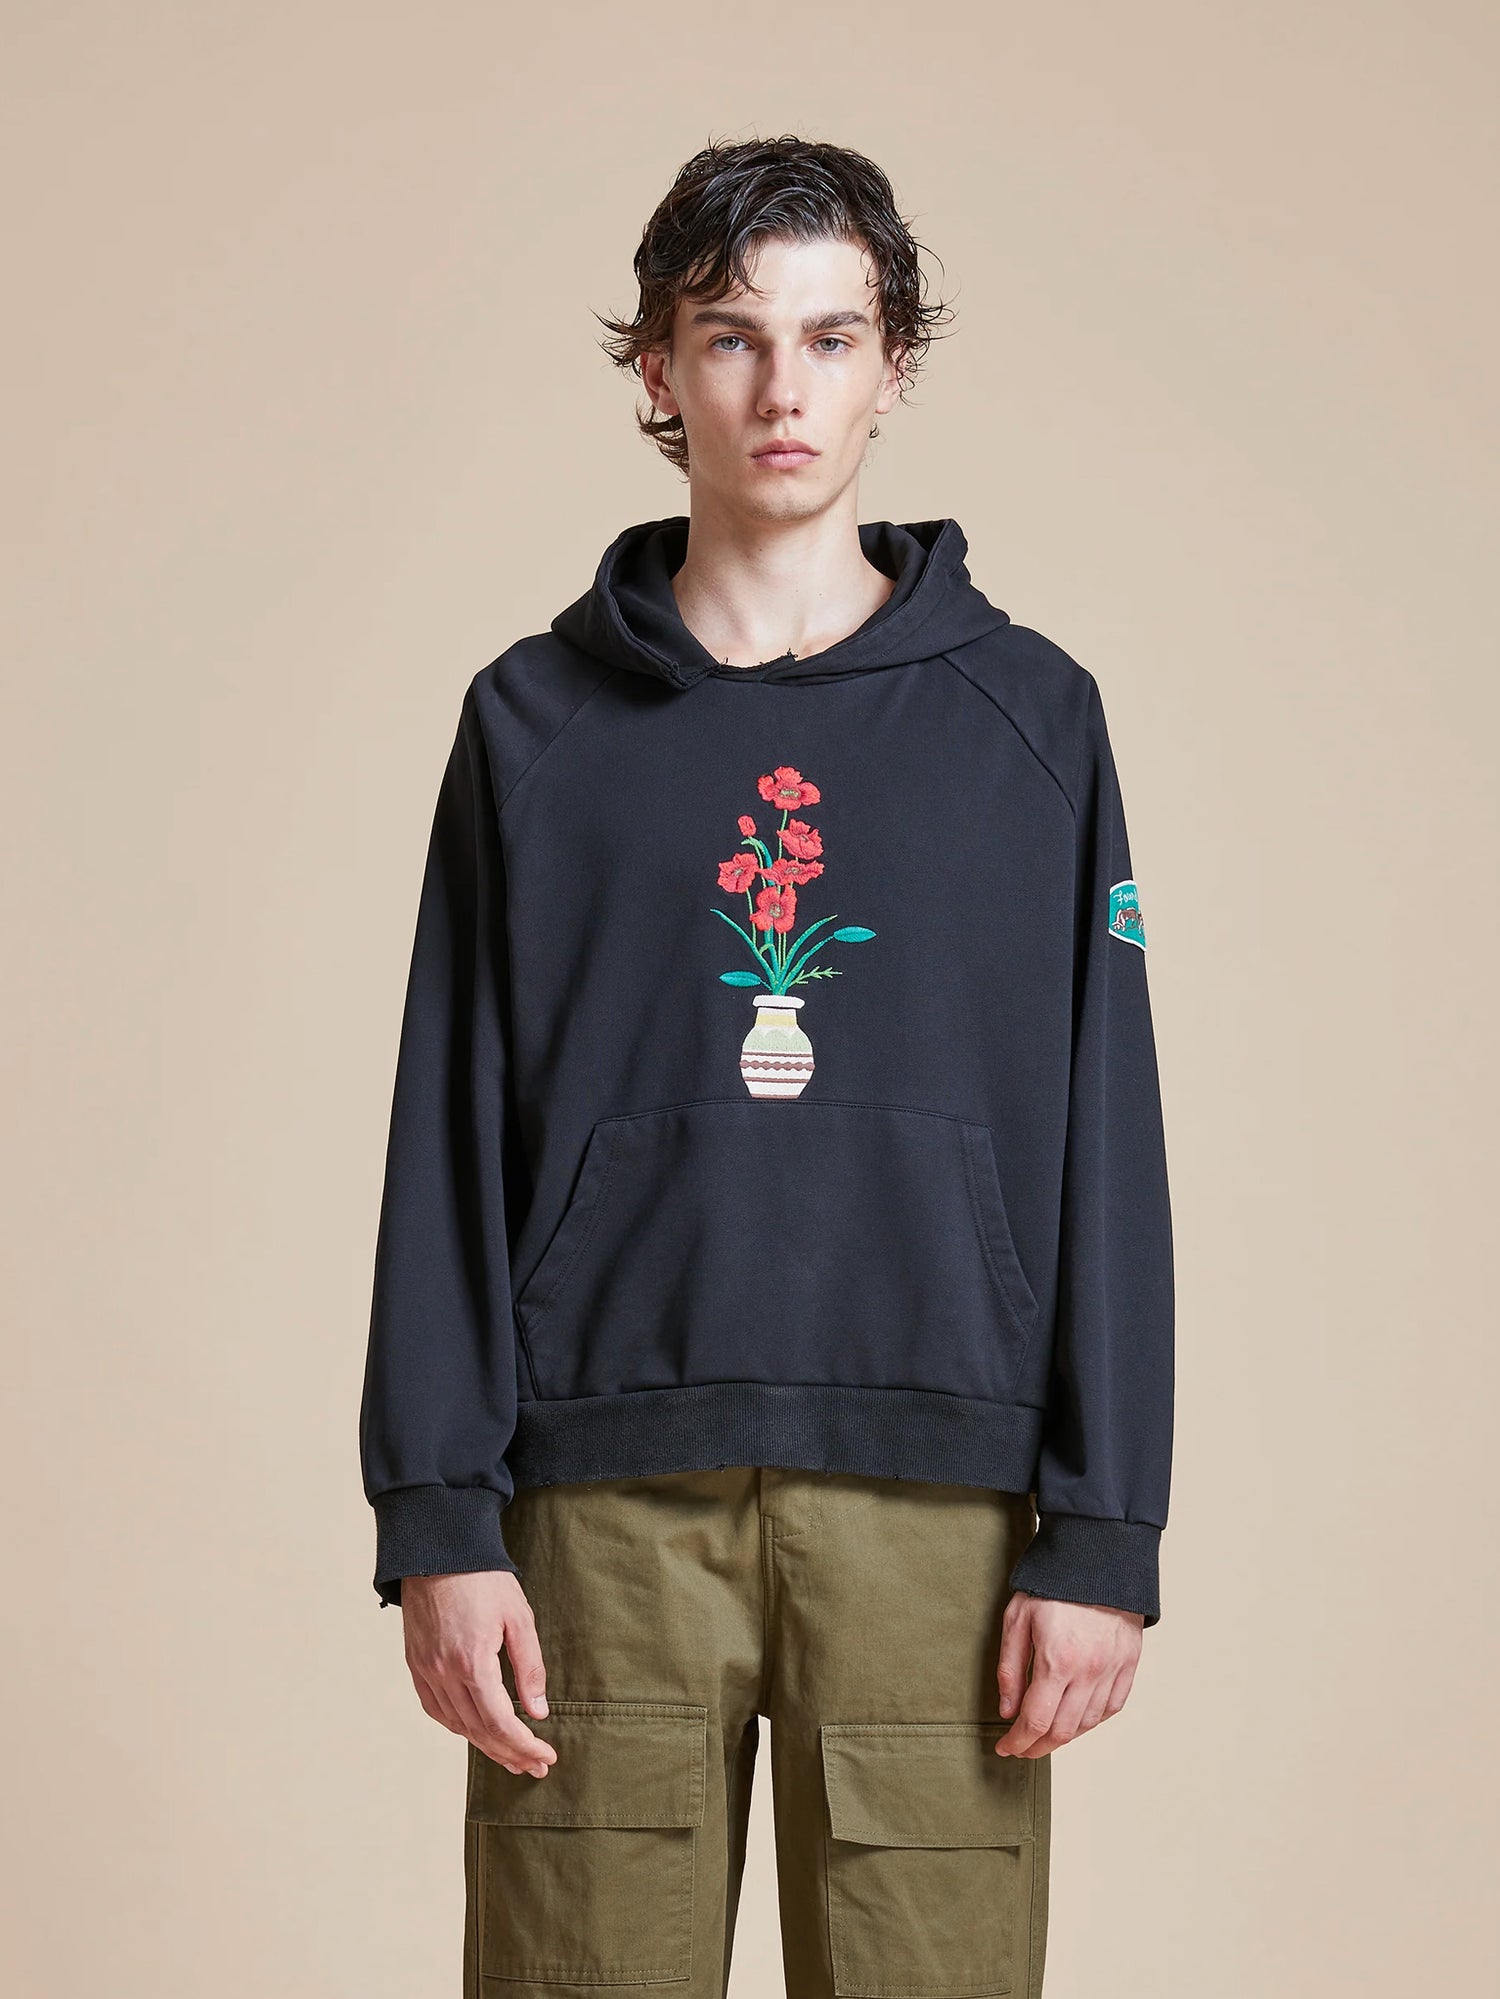 A man wearing a Found Flowers Vase Hoodie, with vintage feel and delicate flowers on it.